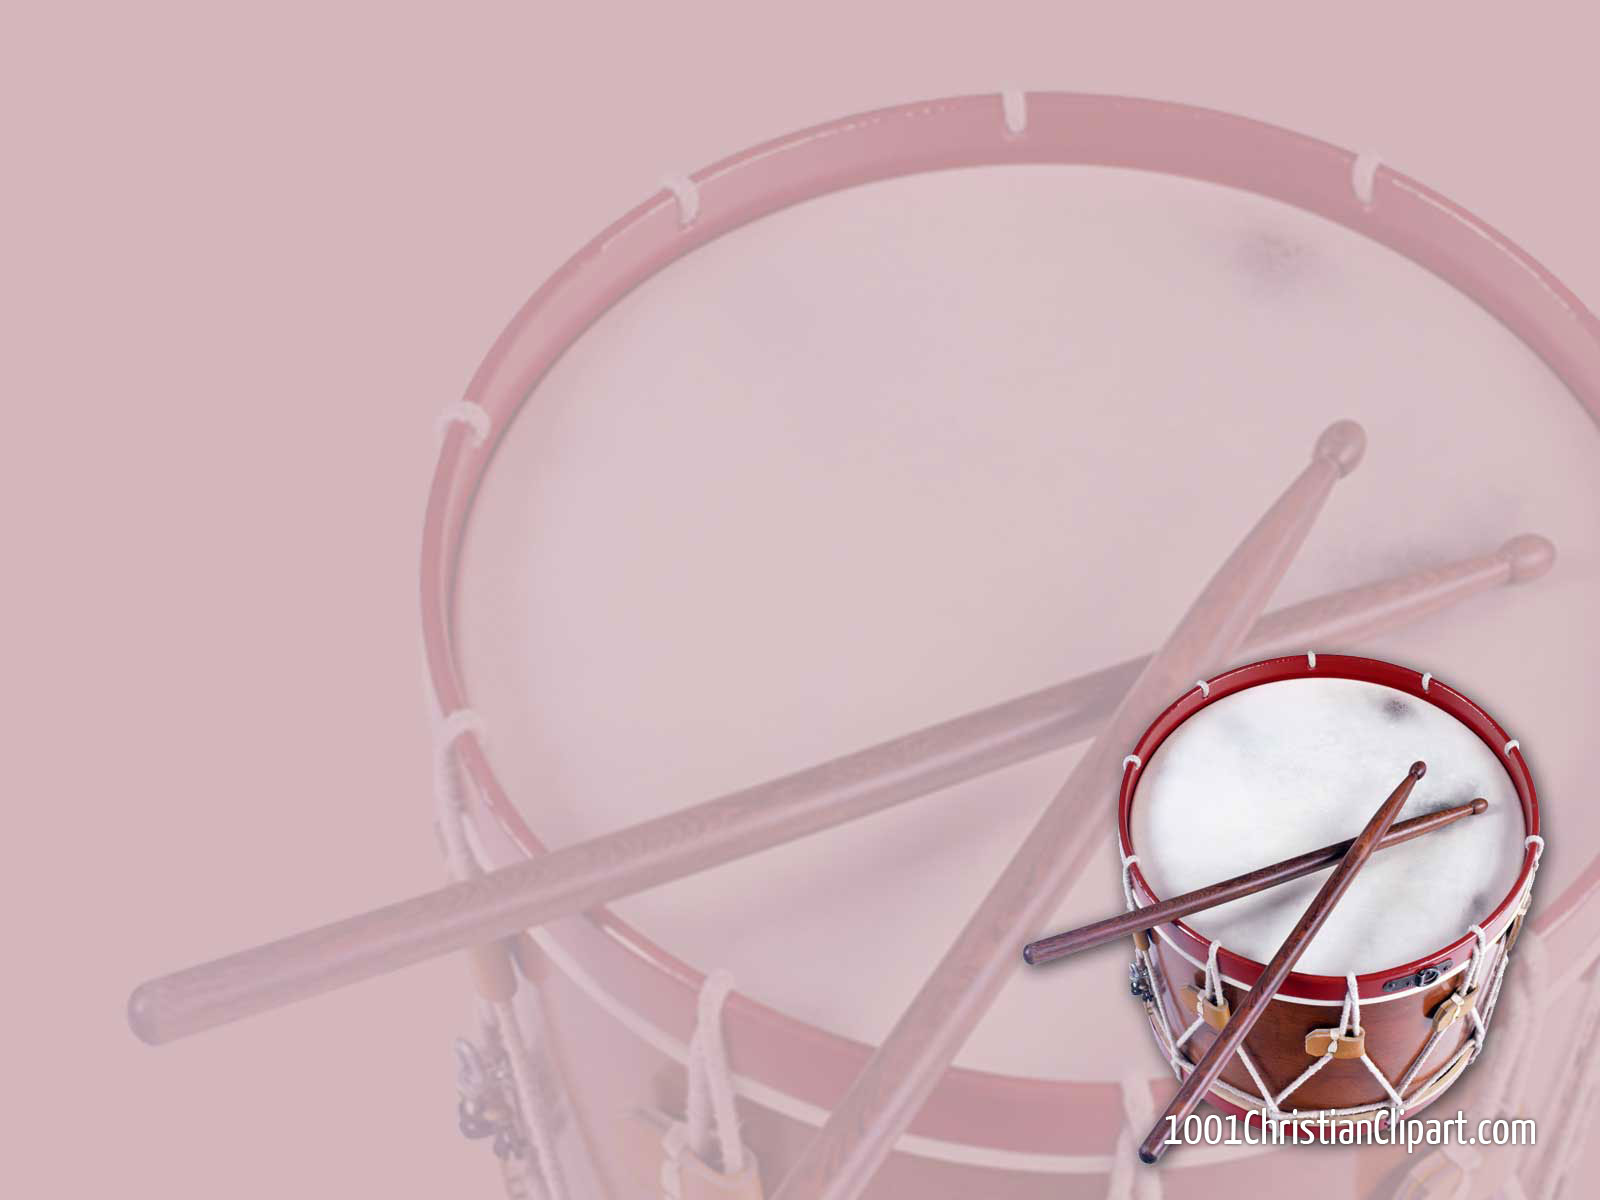  Drum theme, free download Powerpoint backgrounds and desktop wallpaper 